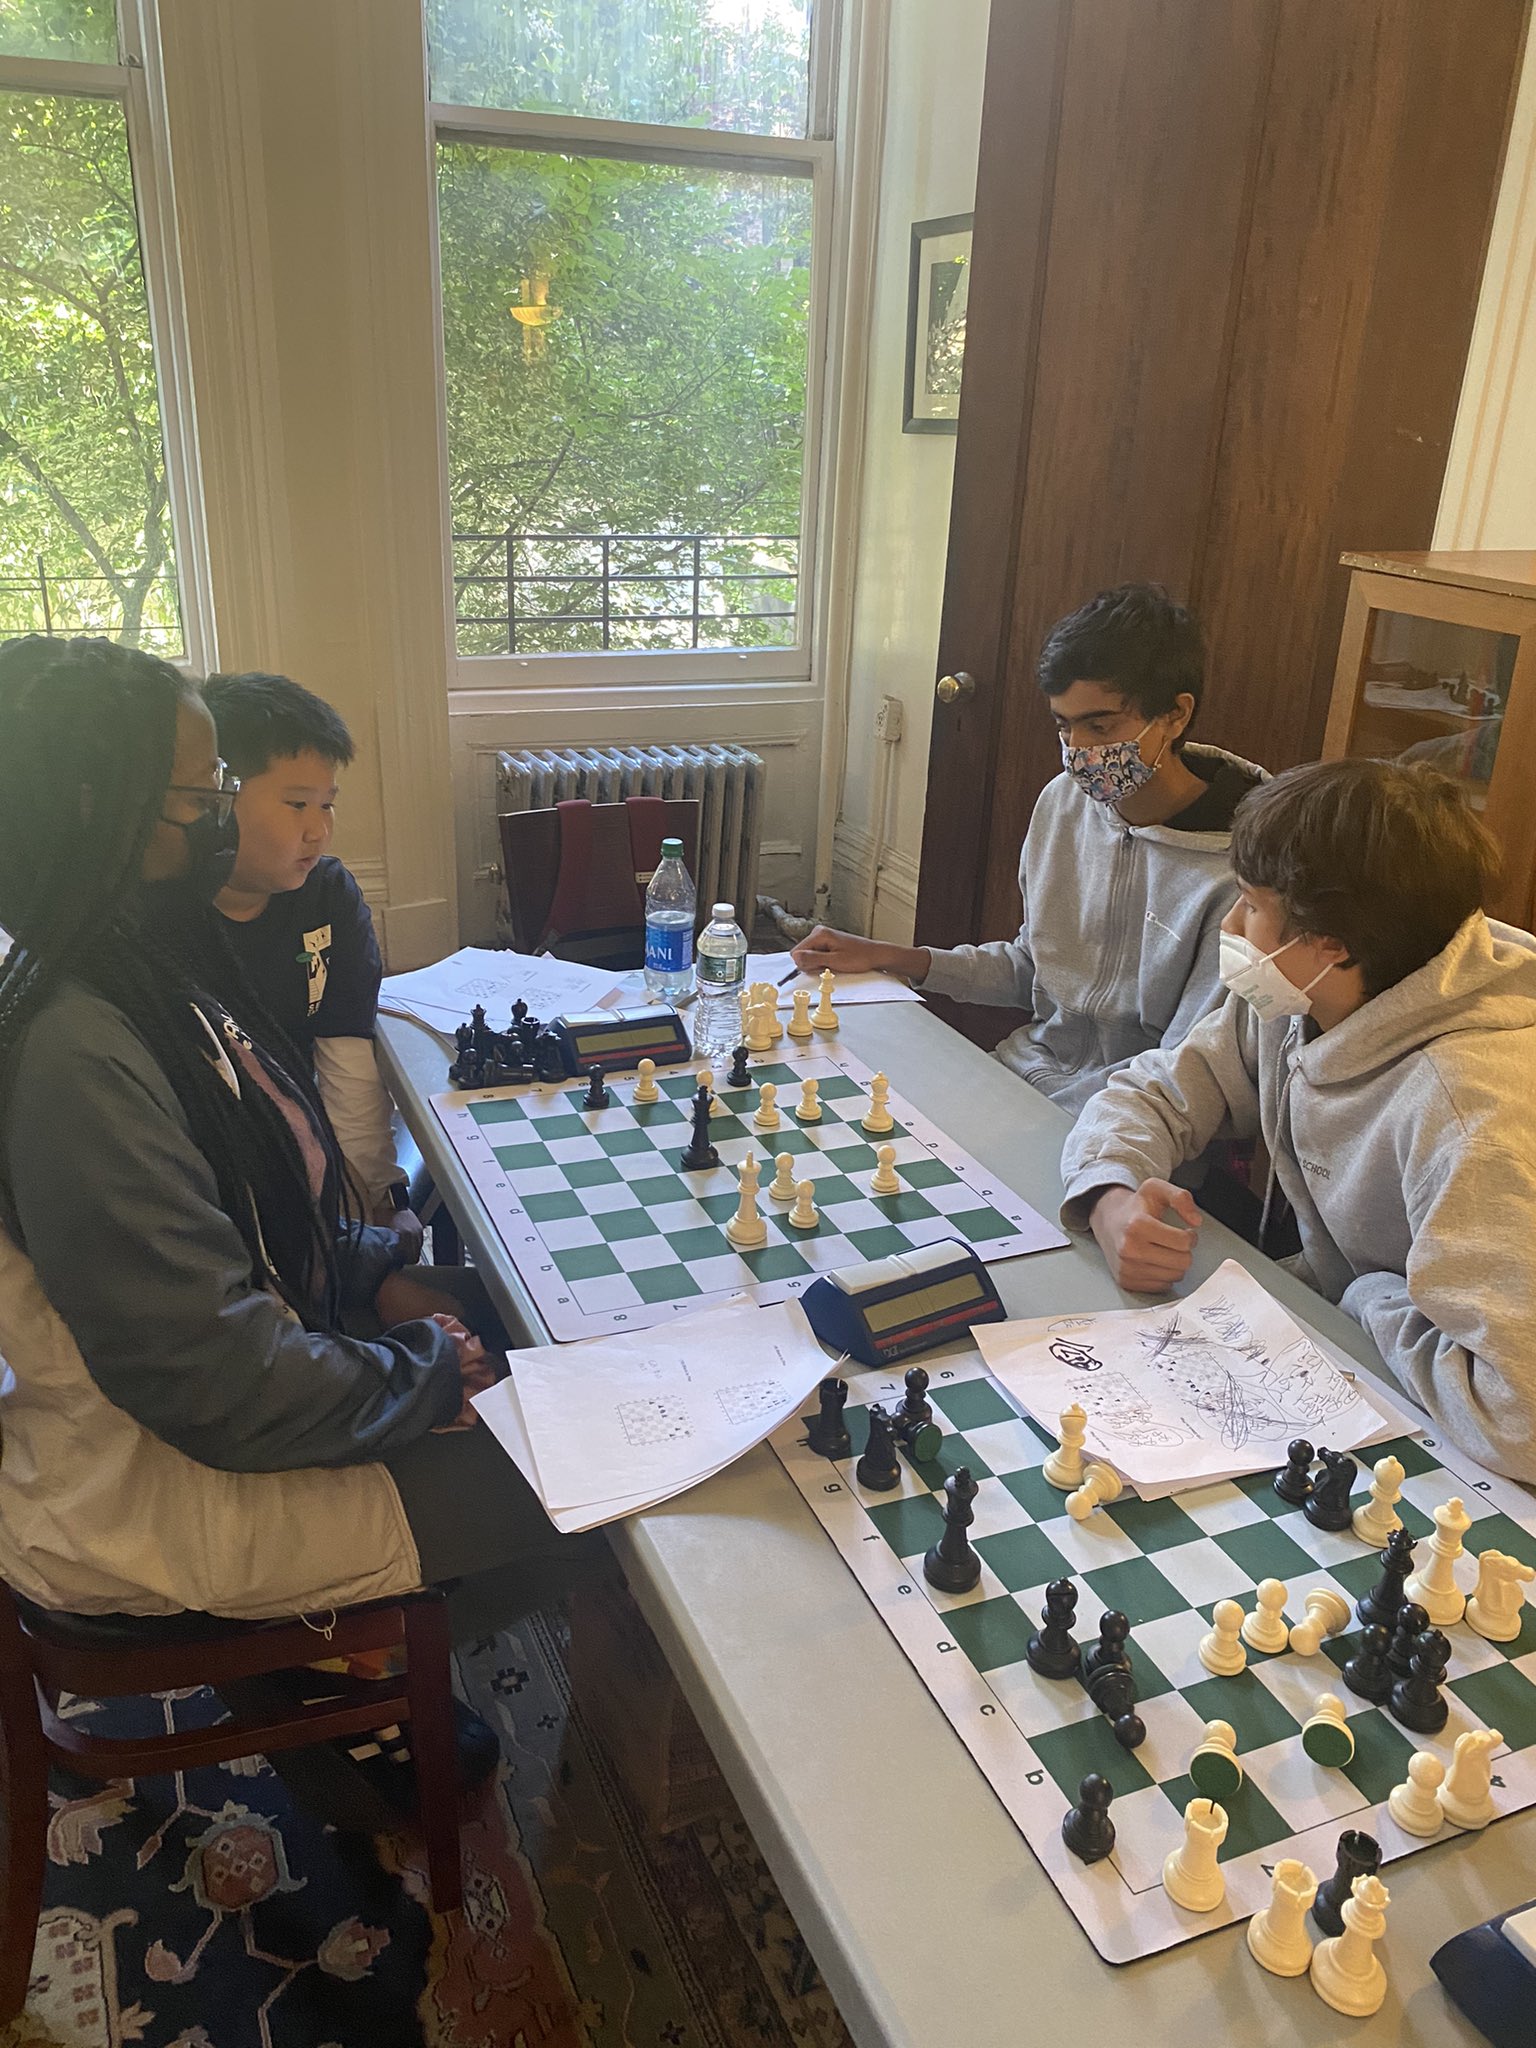 Youngest US Chess Master, 10: I've Got to Work on my Endgame